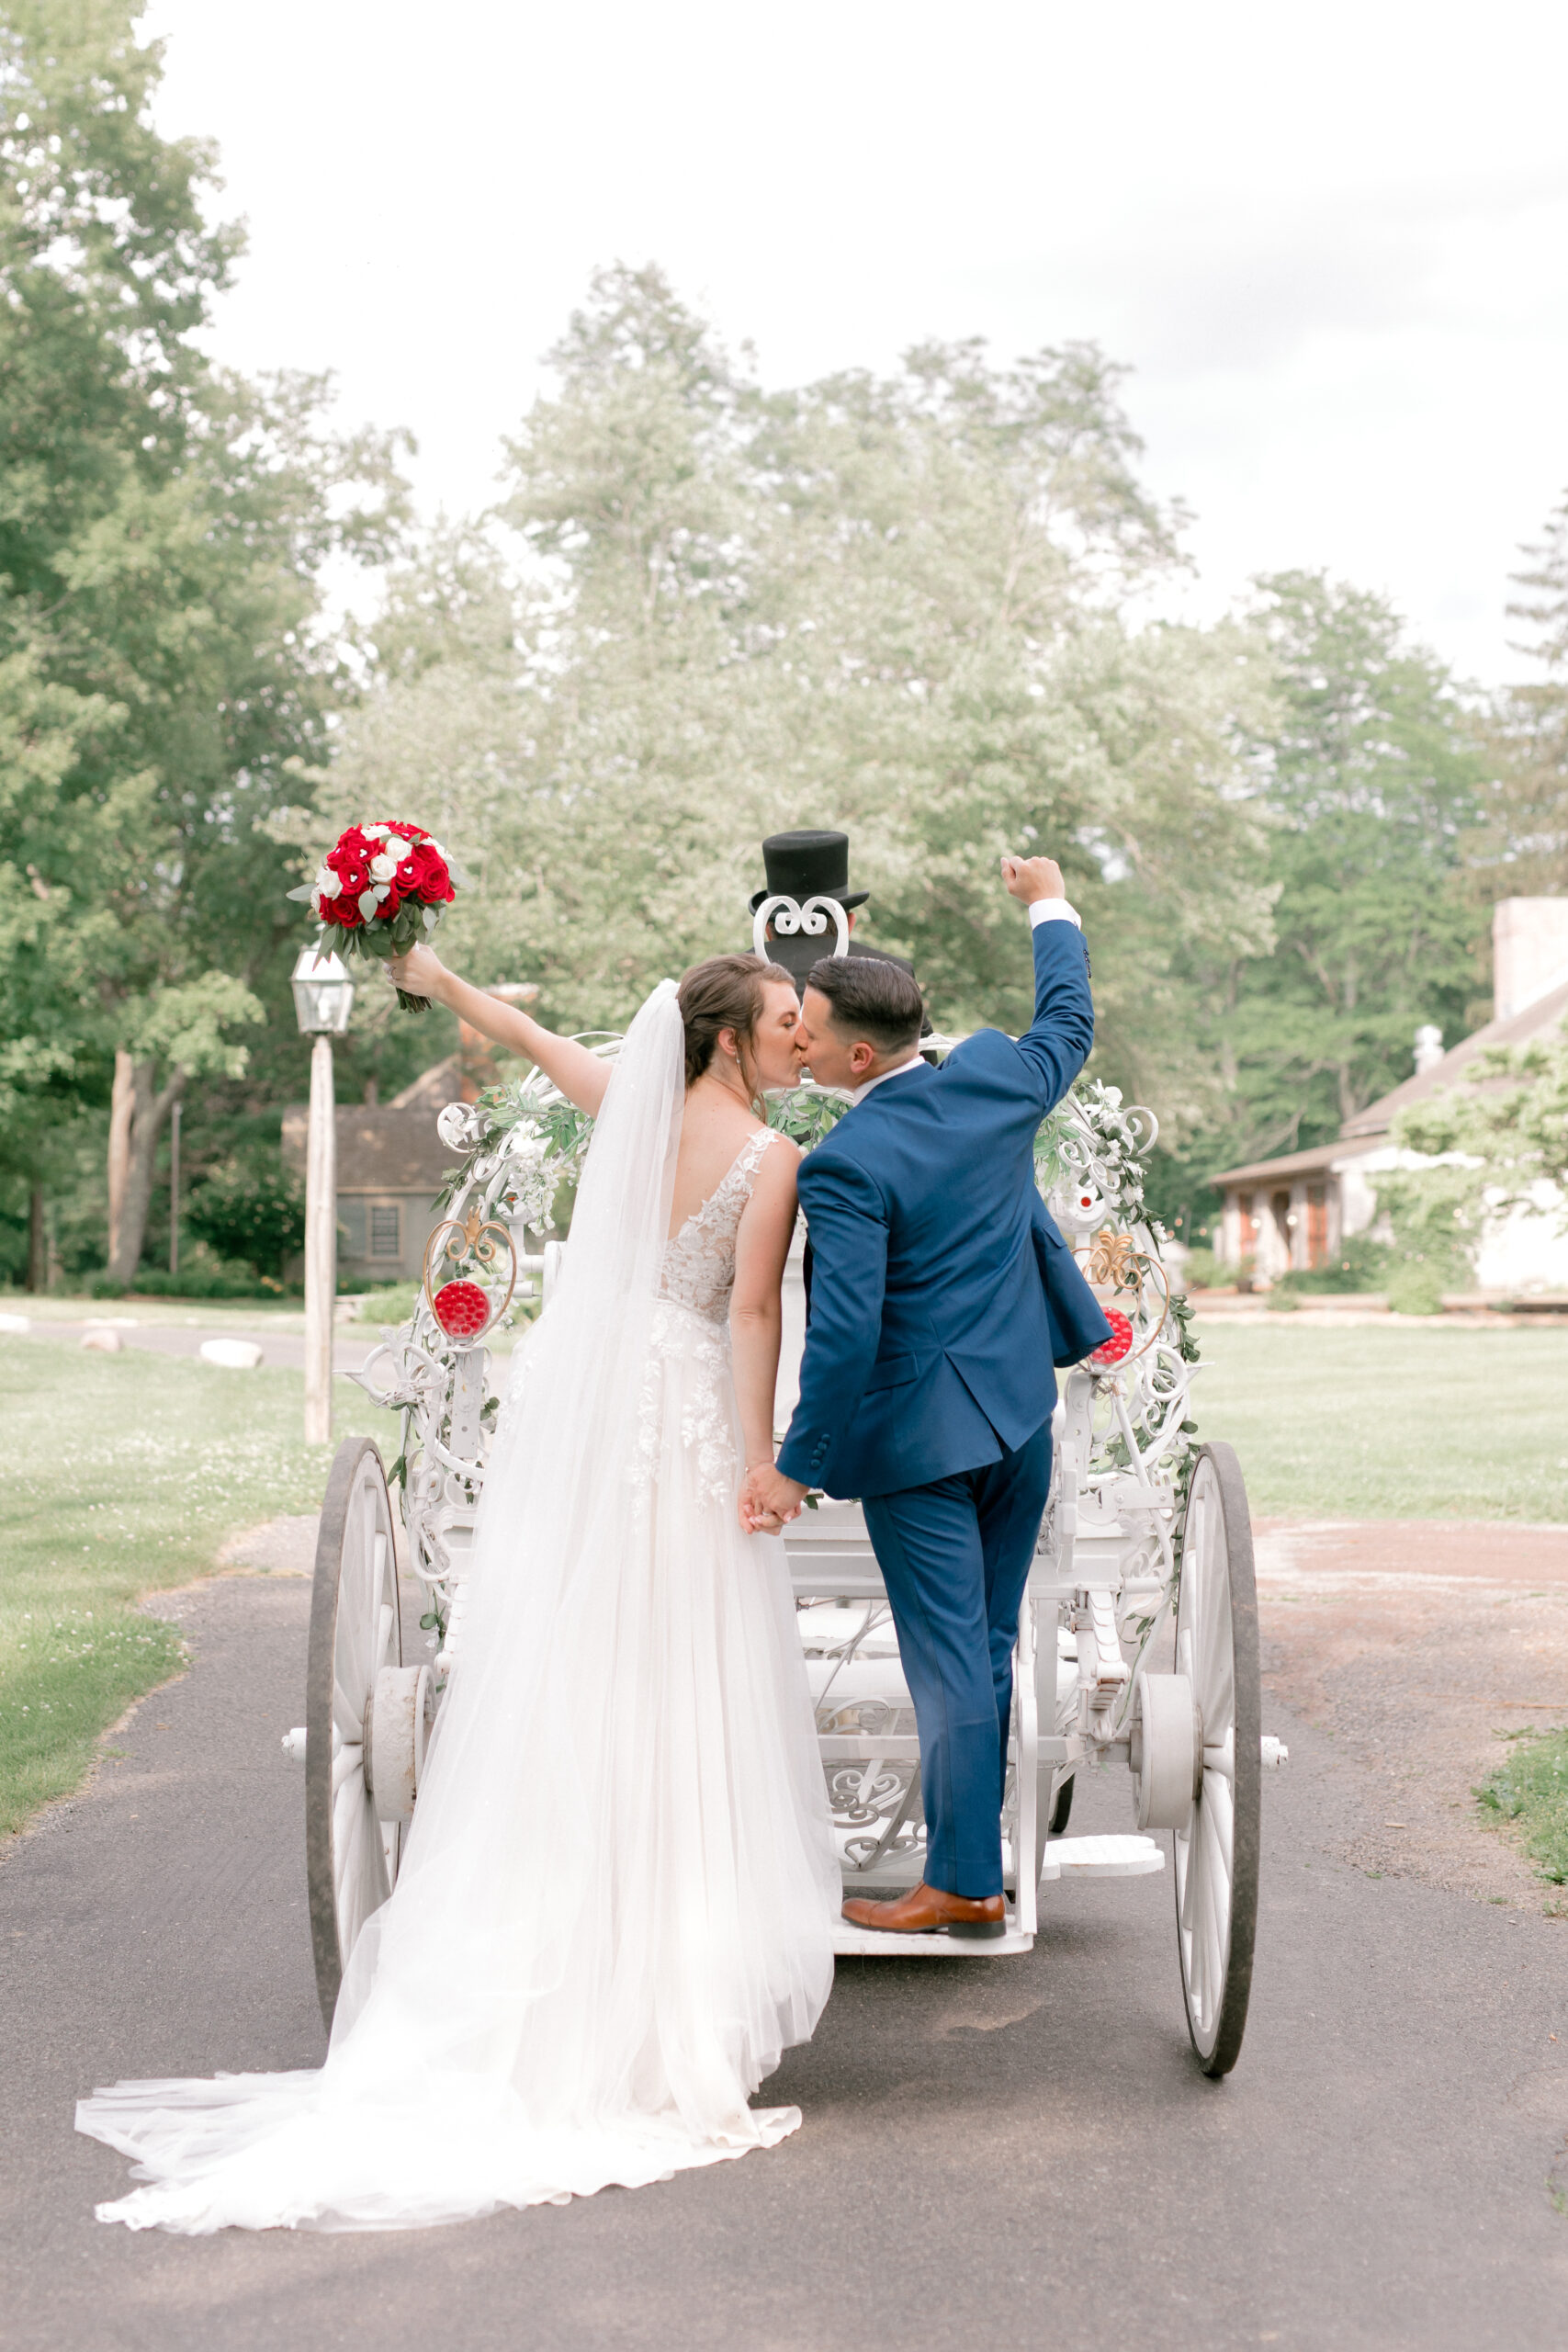 A light and airy summer wedding at Waterloo Village with elegant detail at a historic estate and a horse drawn carriage